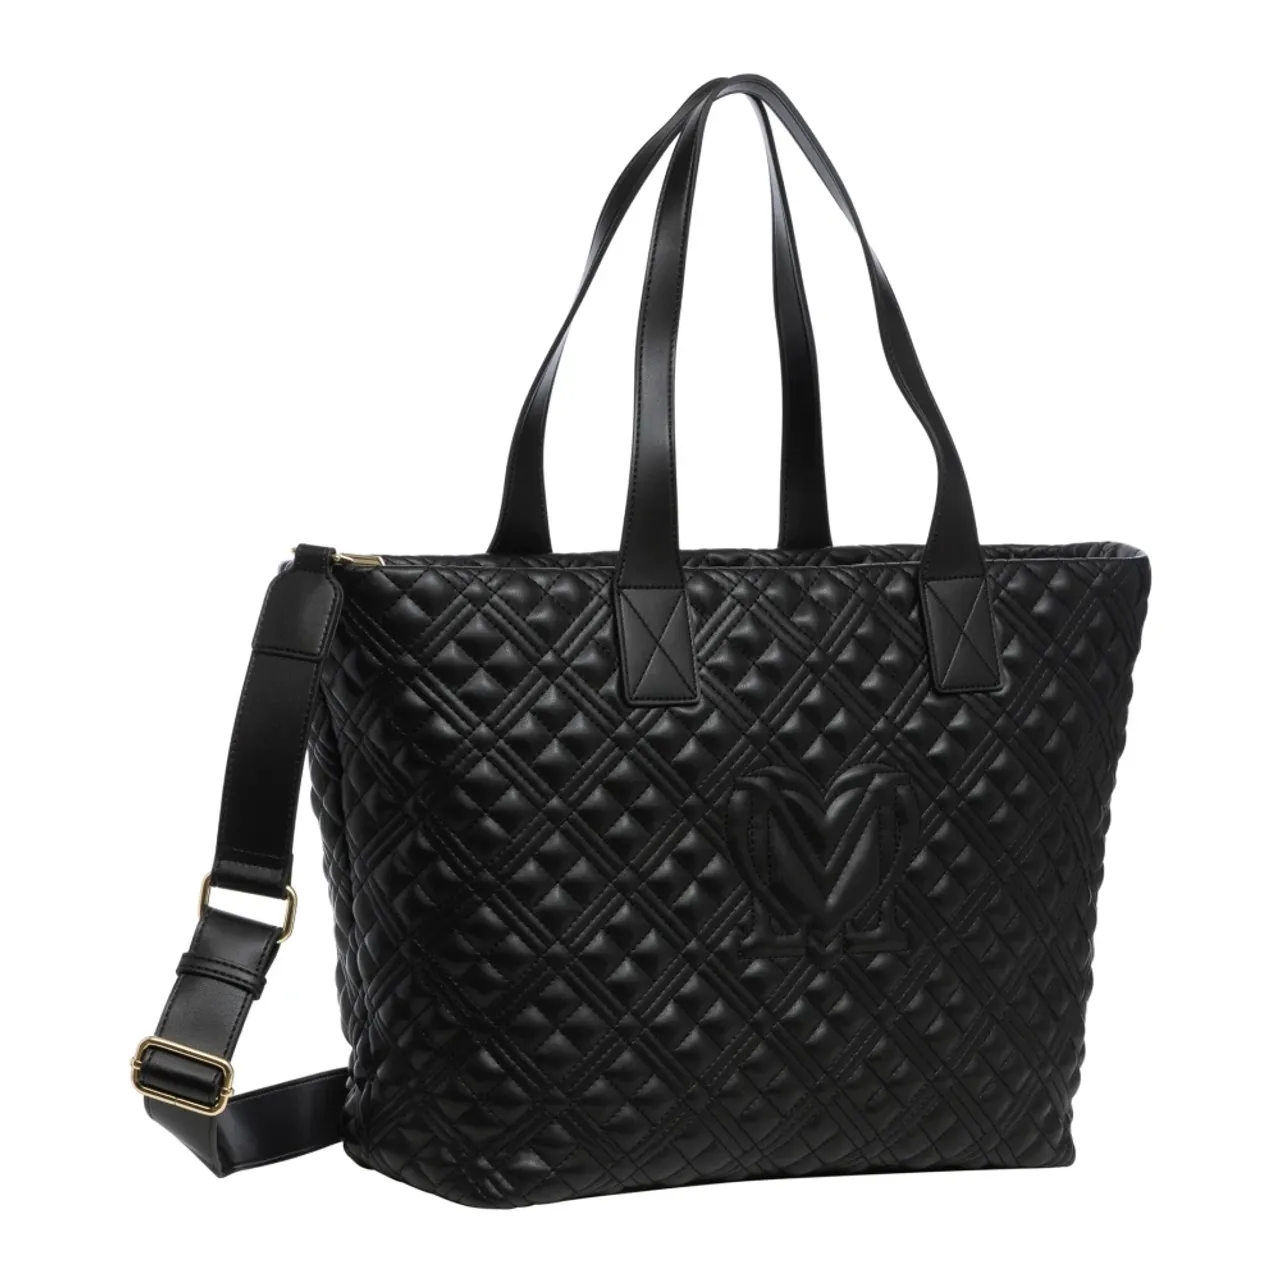 Love Moschino , Adjustable Tote Bag with Detachable Strap ,Black female, Sizes: ONE SIZE